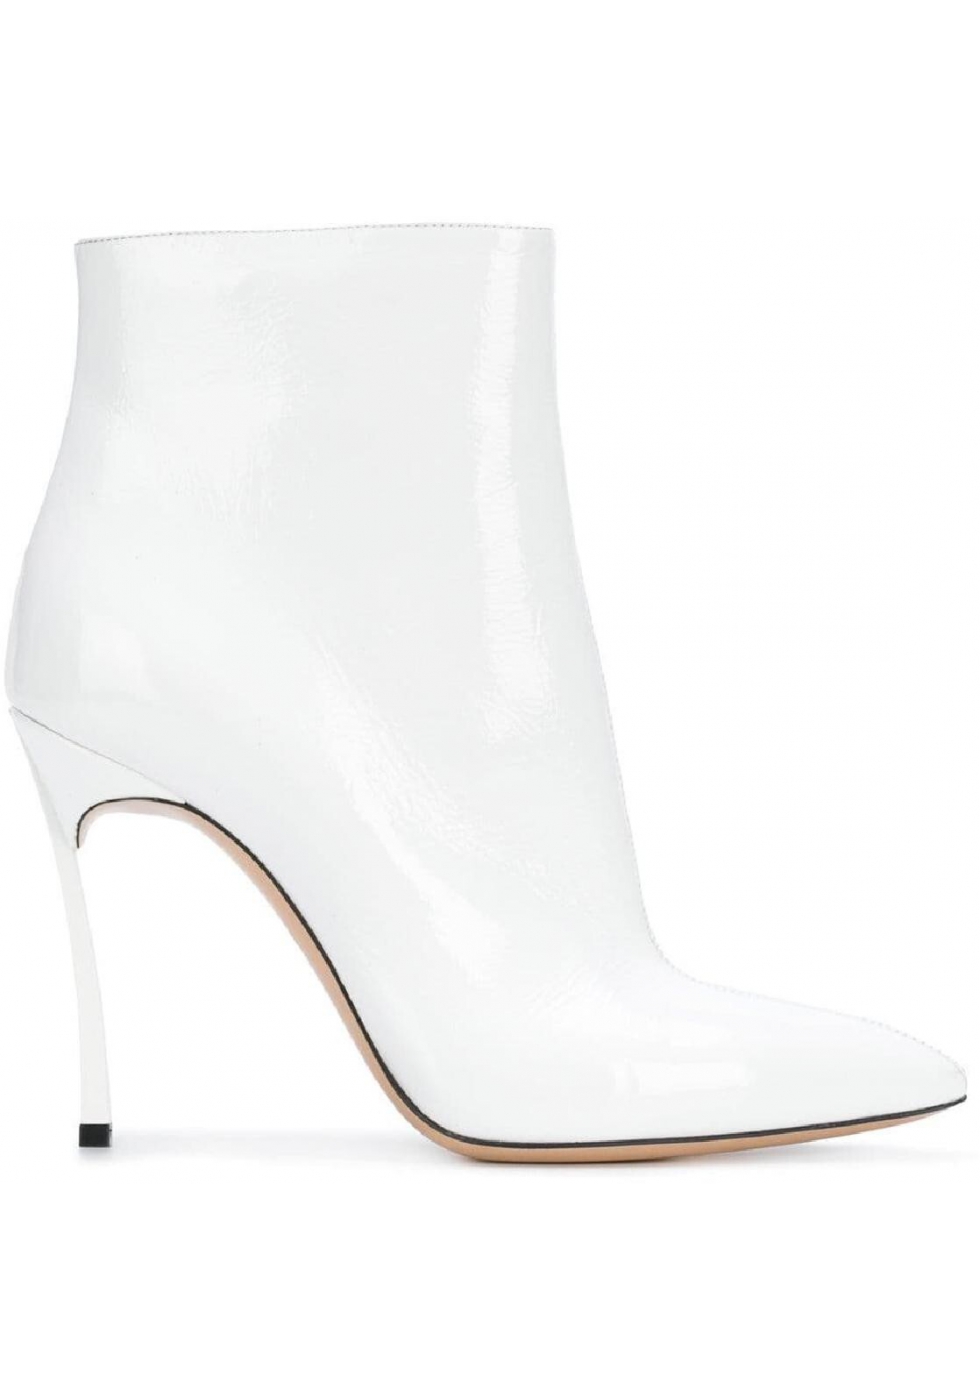 Casadei women's ankle boots in white Patent Leather with stiletto heels ...